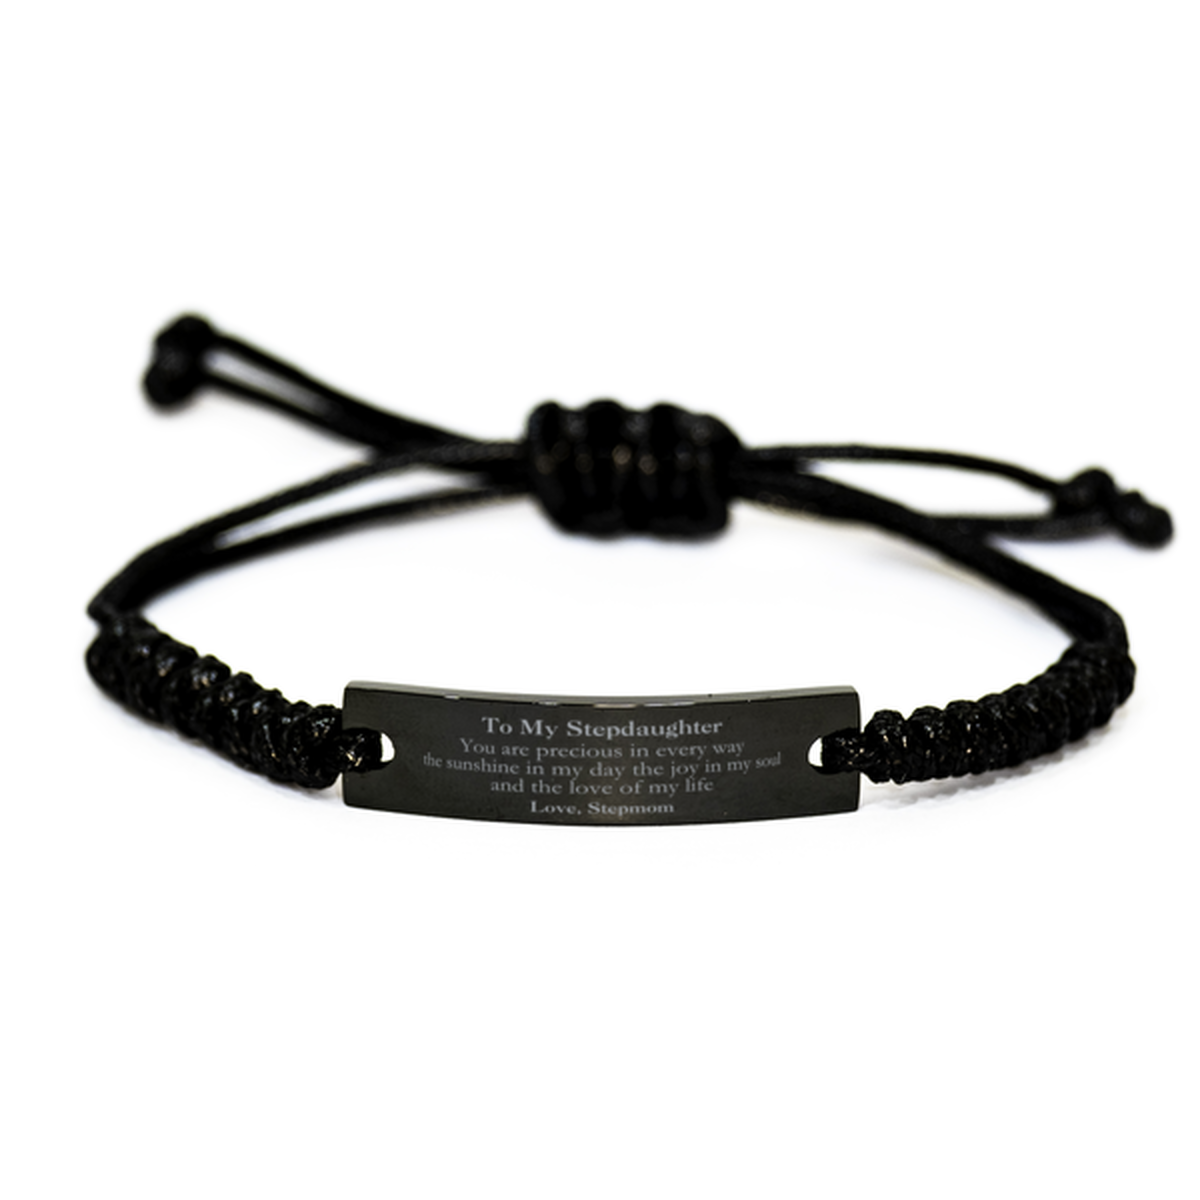 Graduation Gifts for Stepdaughter Black Rope Bracelet Present from Stepmom, Christmas Stepdaughter Birthday Gifts Stepdaughter You are precious in every way the sunshine in my day. Love, Stepmom